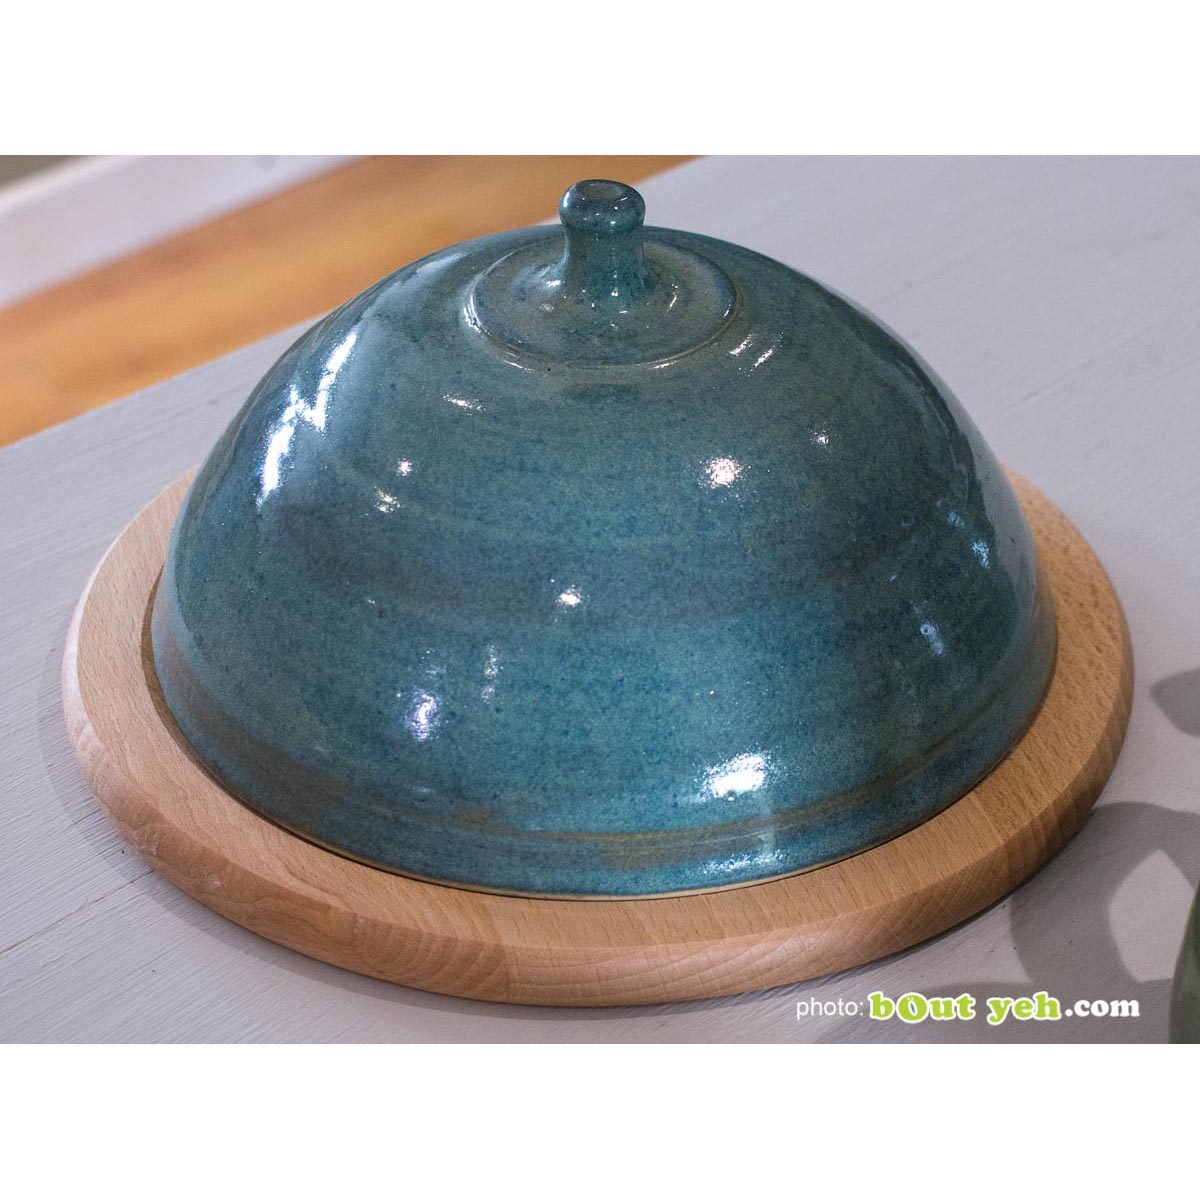 Cheeseboard bell and board - contemporary hand made Irish pottery. Photo 1471